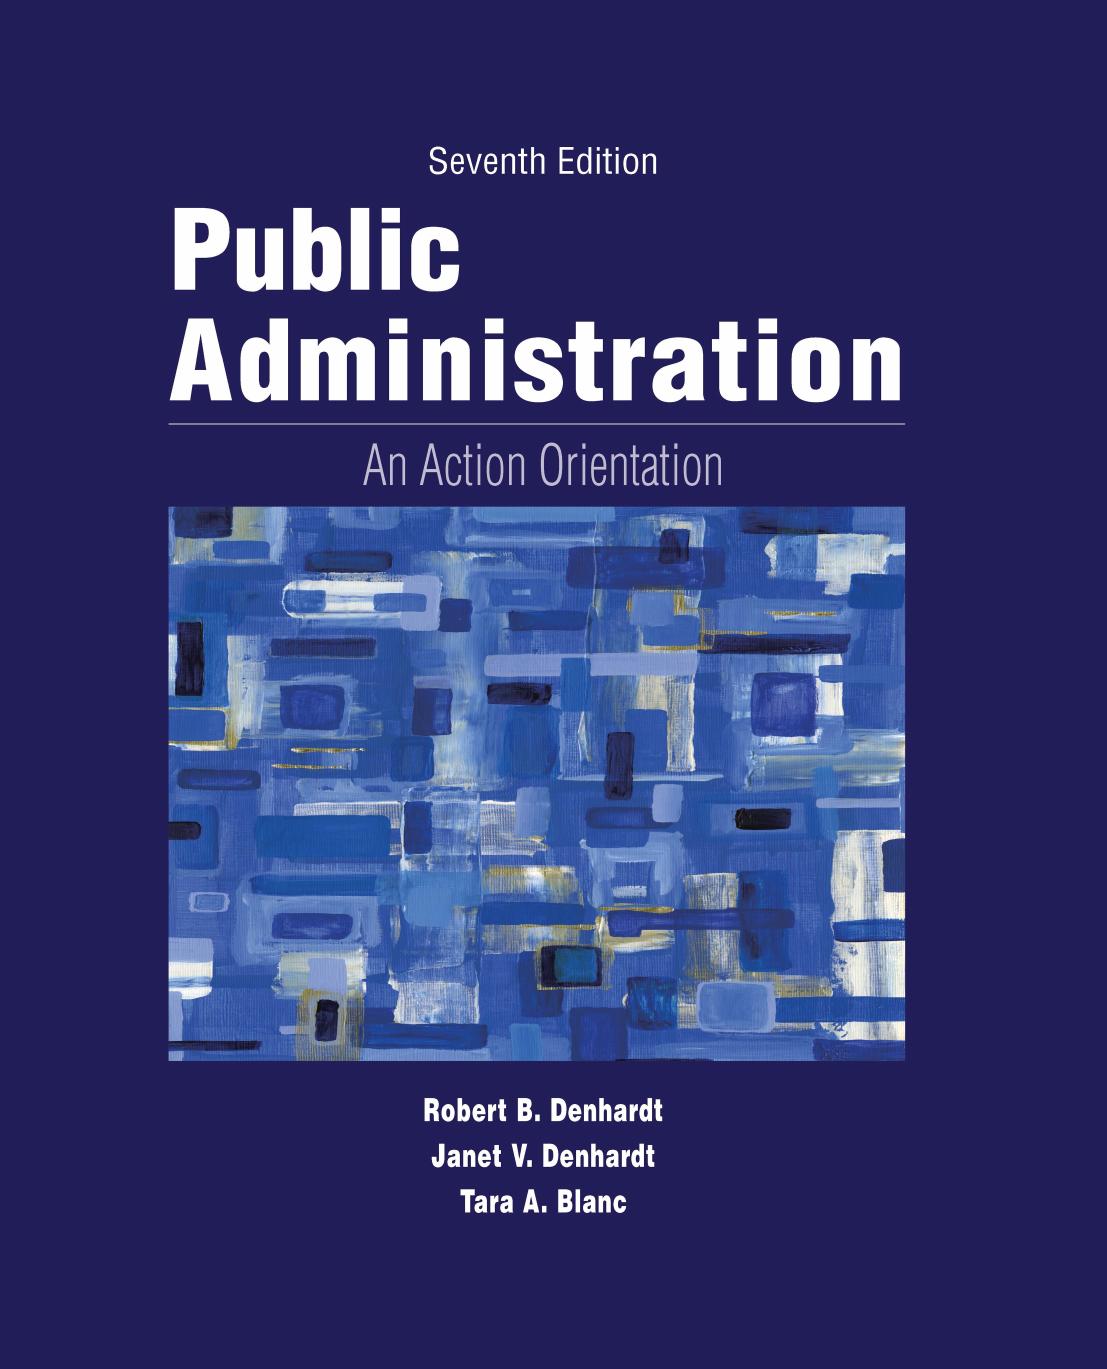 Public Administration: An Action Orientation, Integrated CourseReader Package with Printed Access Card for CourseReader 0-30: Public Administration, 7th ed.